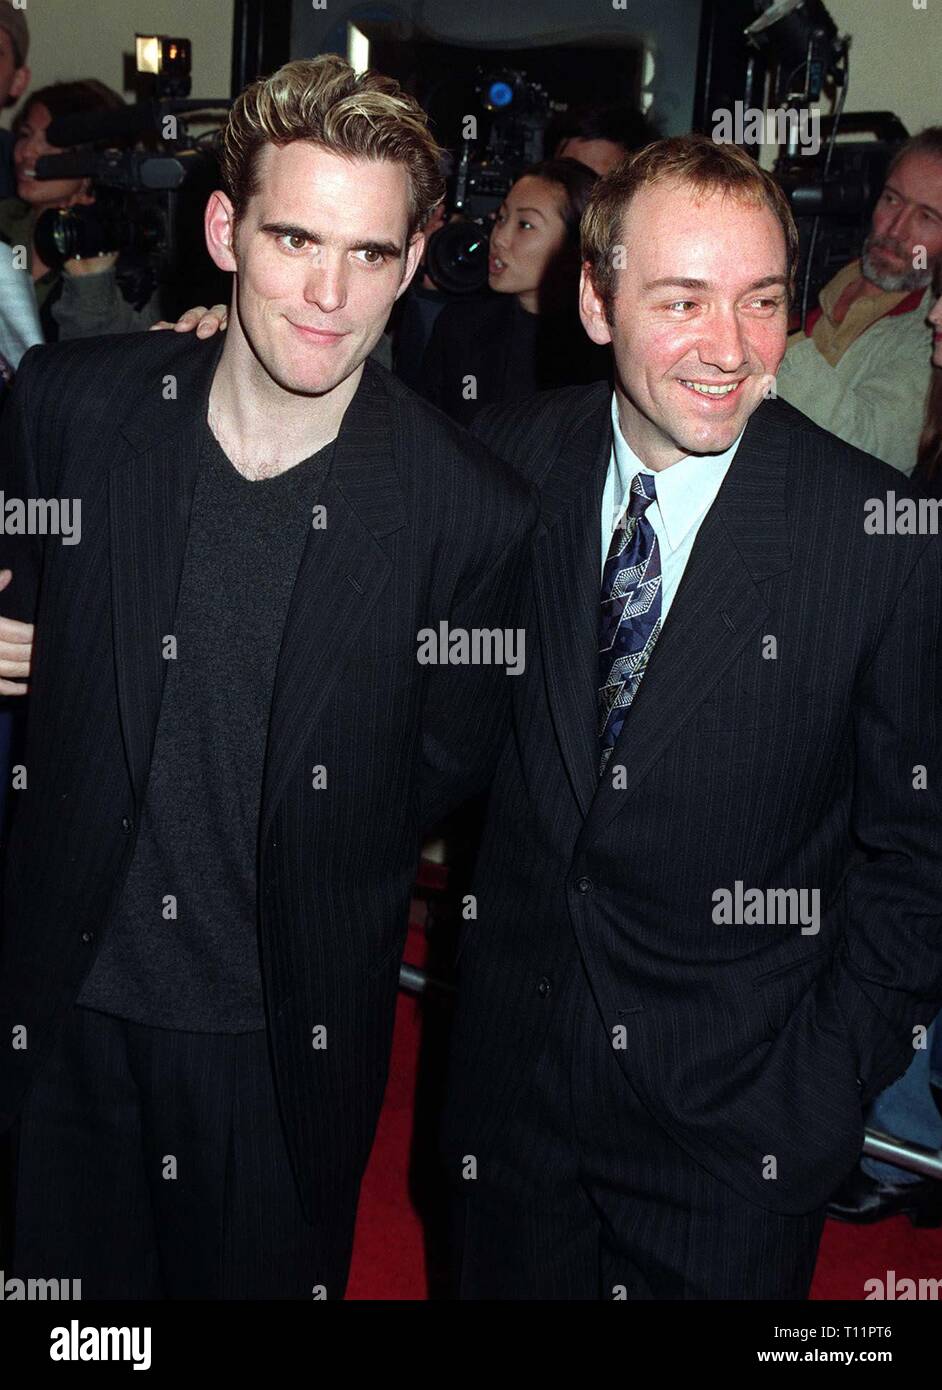 LOS ANGELES, CA. January 14, 1997: Actor Matt Dillon with actor/director Kevin Spacey at the premiere of 'Albino Alligator,' Spacey's first movie as director. Stock Photo